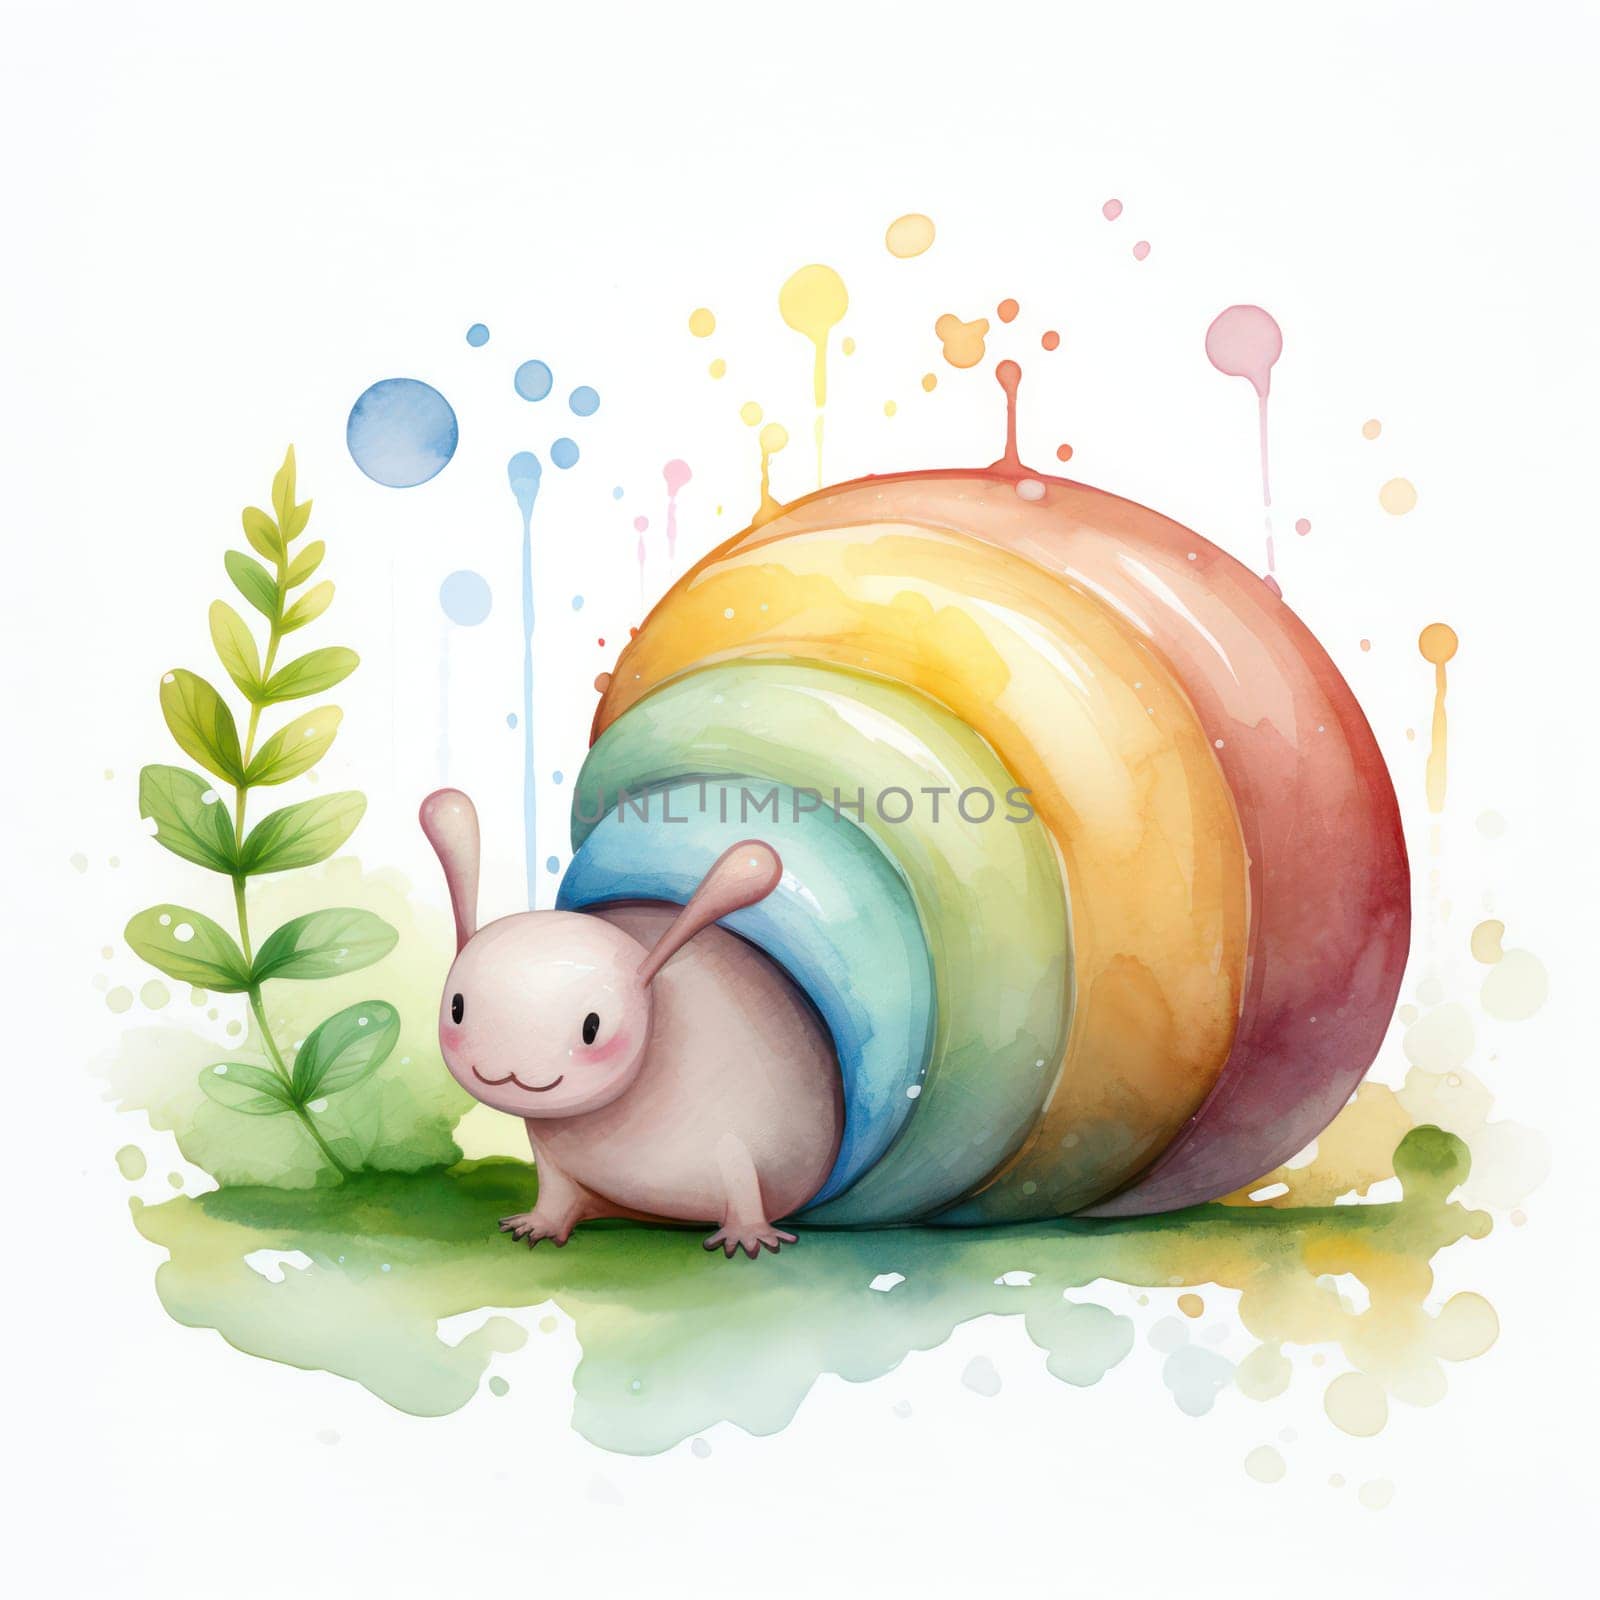 Sweet Animals Cartoon Character Card: Cute Baby Animals Celebrating Love and Happiness on a Colorful Watercolor Background